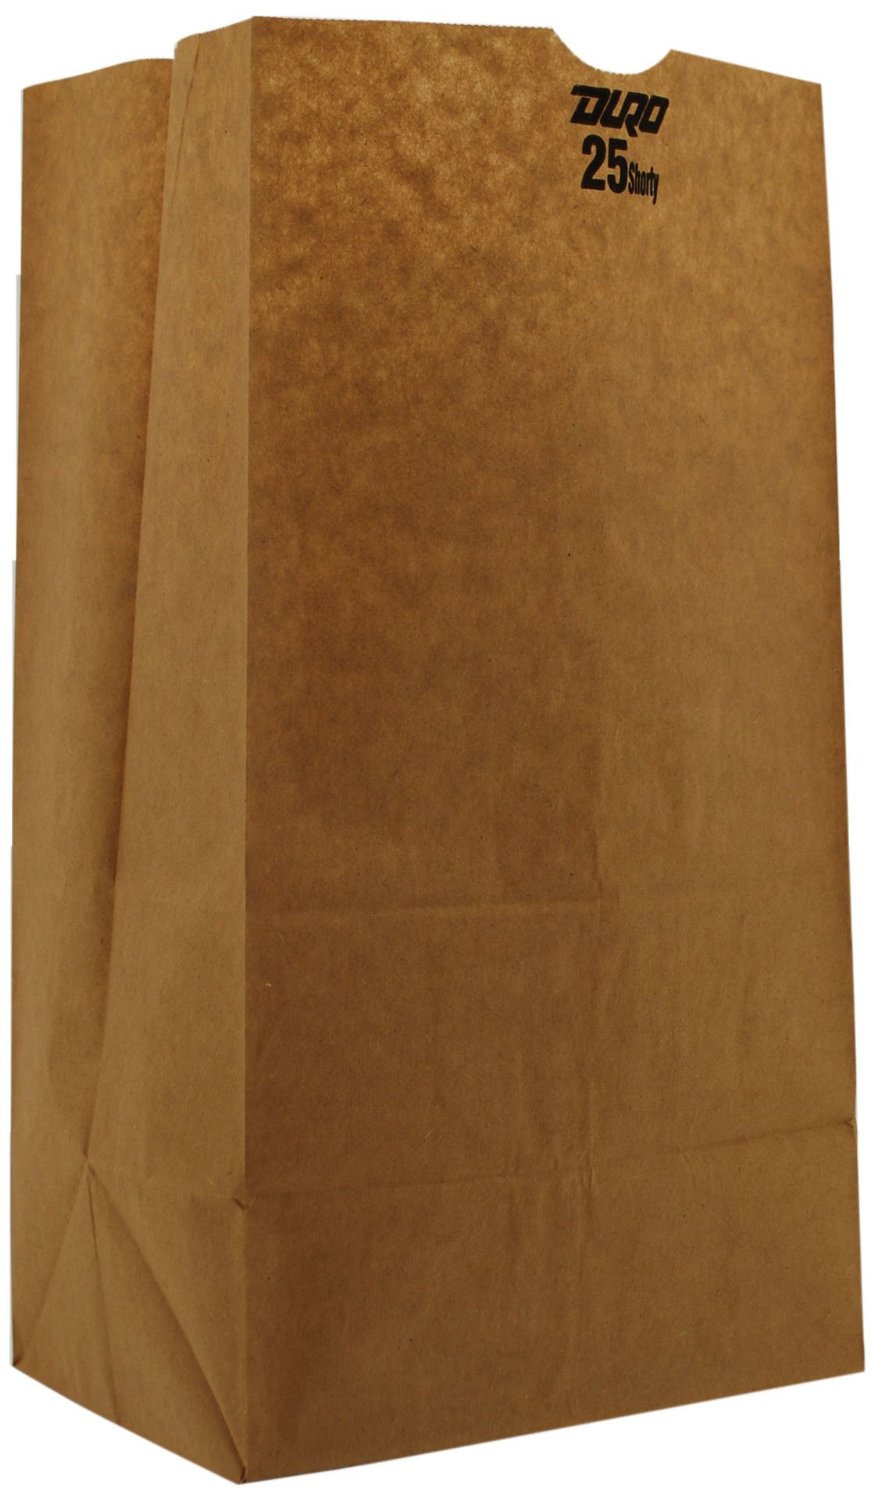 25# Short Natural Grocery Bags 8.25 X 6.125 X 15.875 -